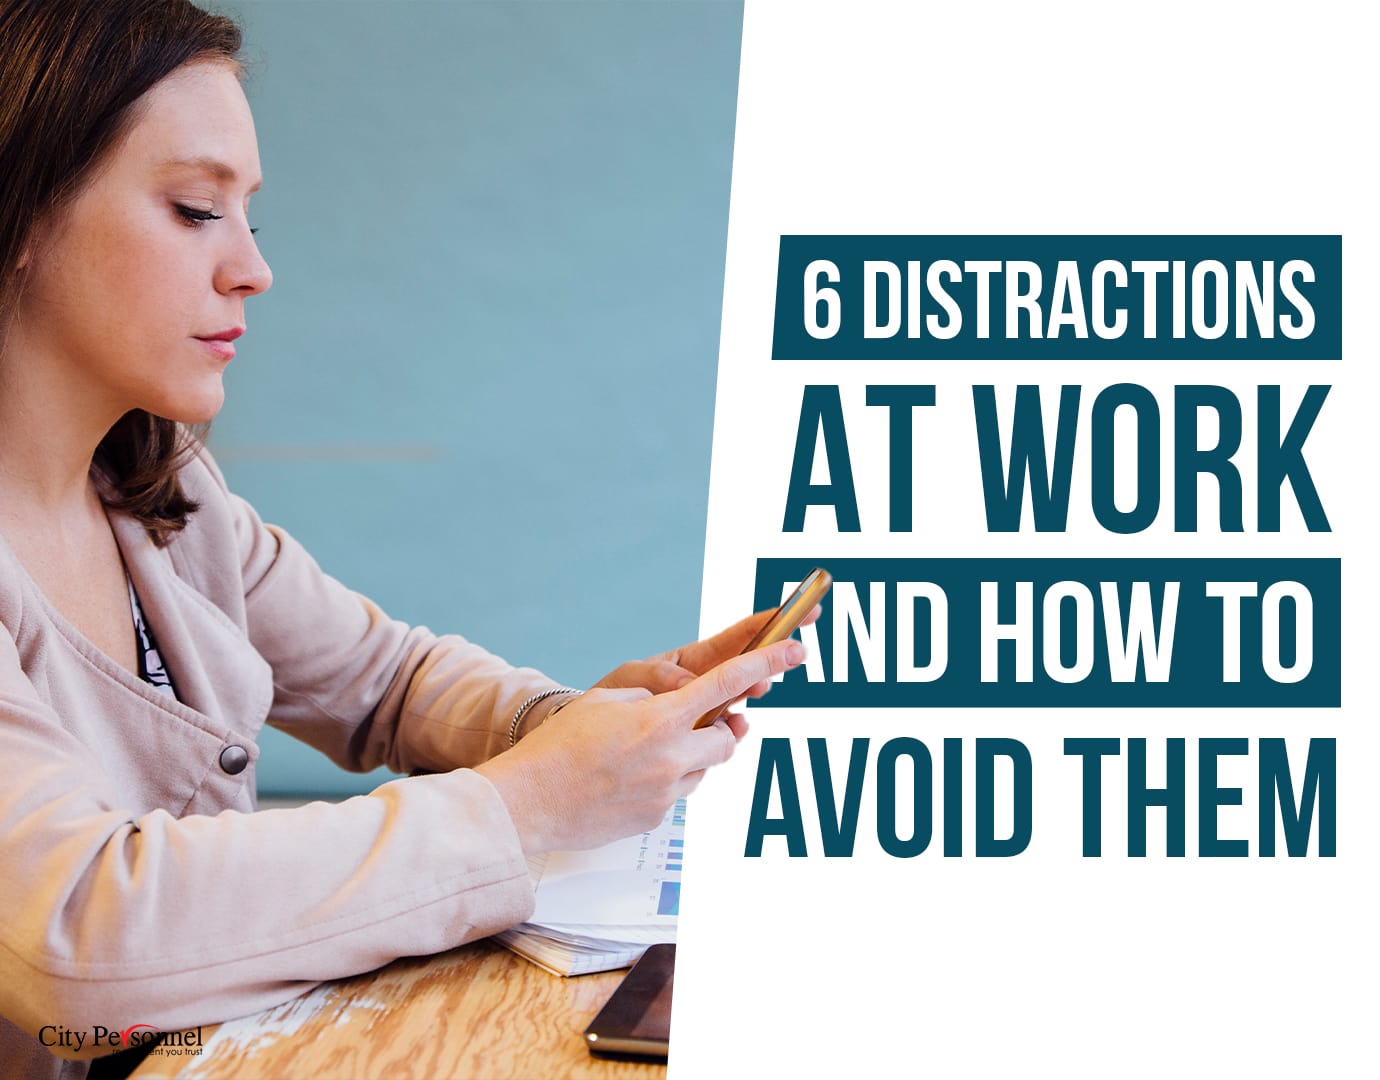 6 Distractions at Work and How to Avoid Them